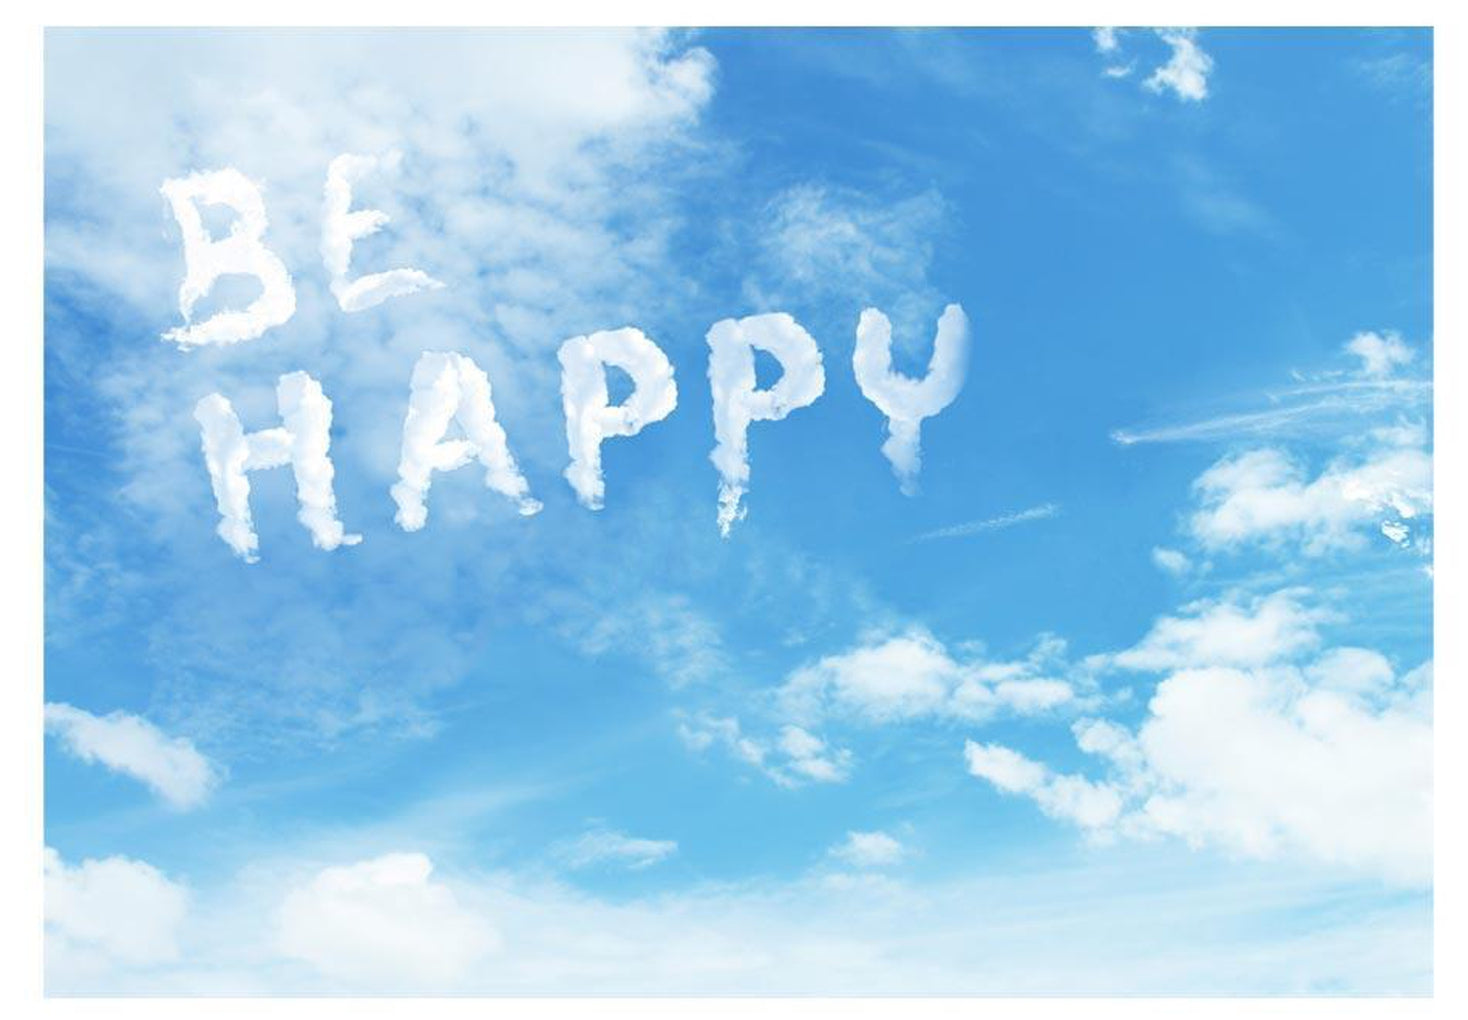 Wall mural - Be happy-TipTopHomeDecor